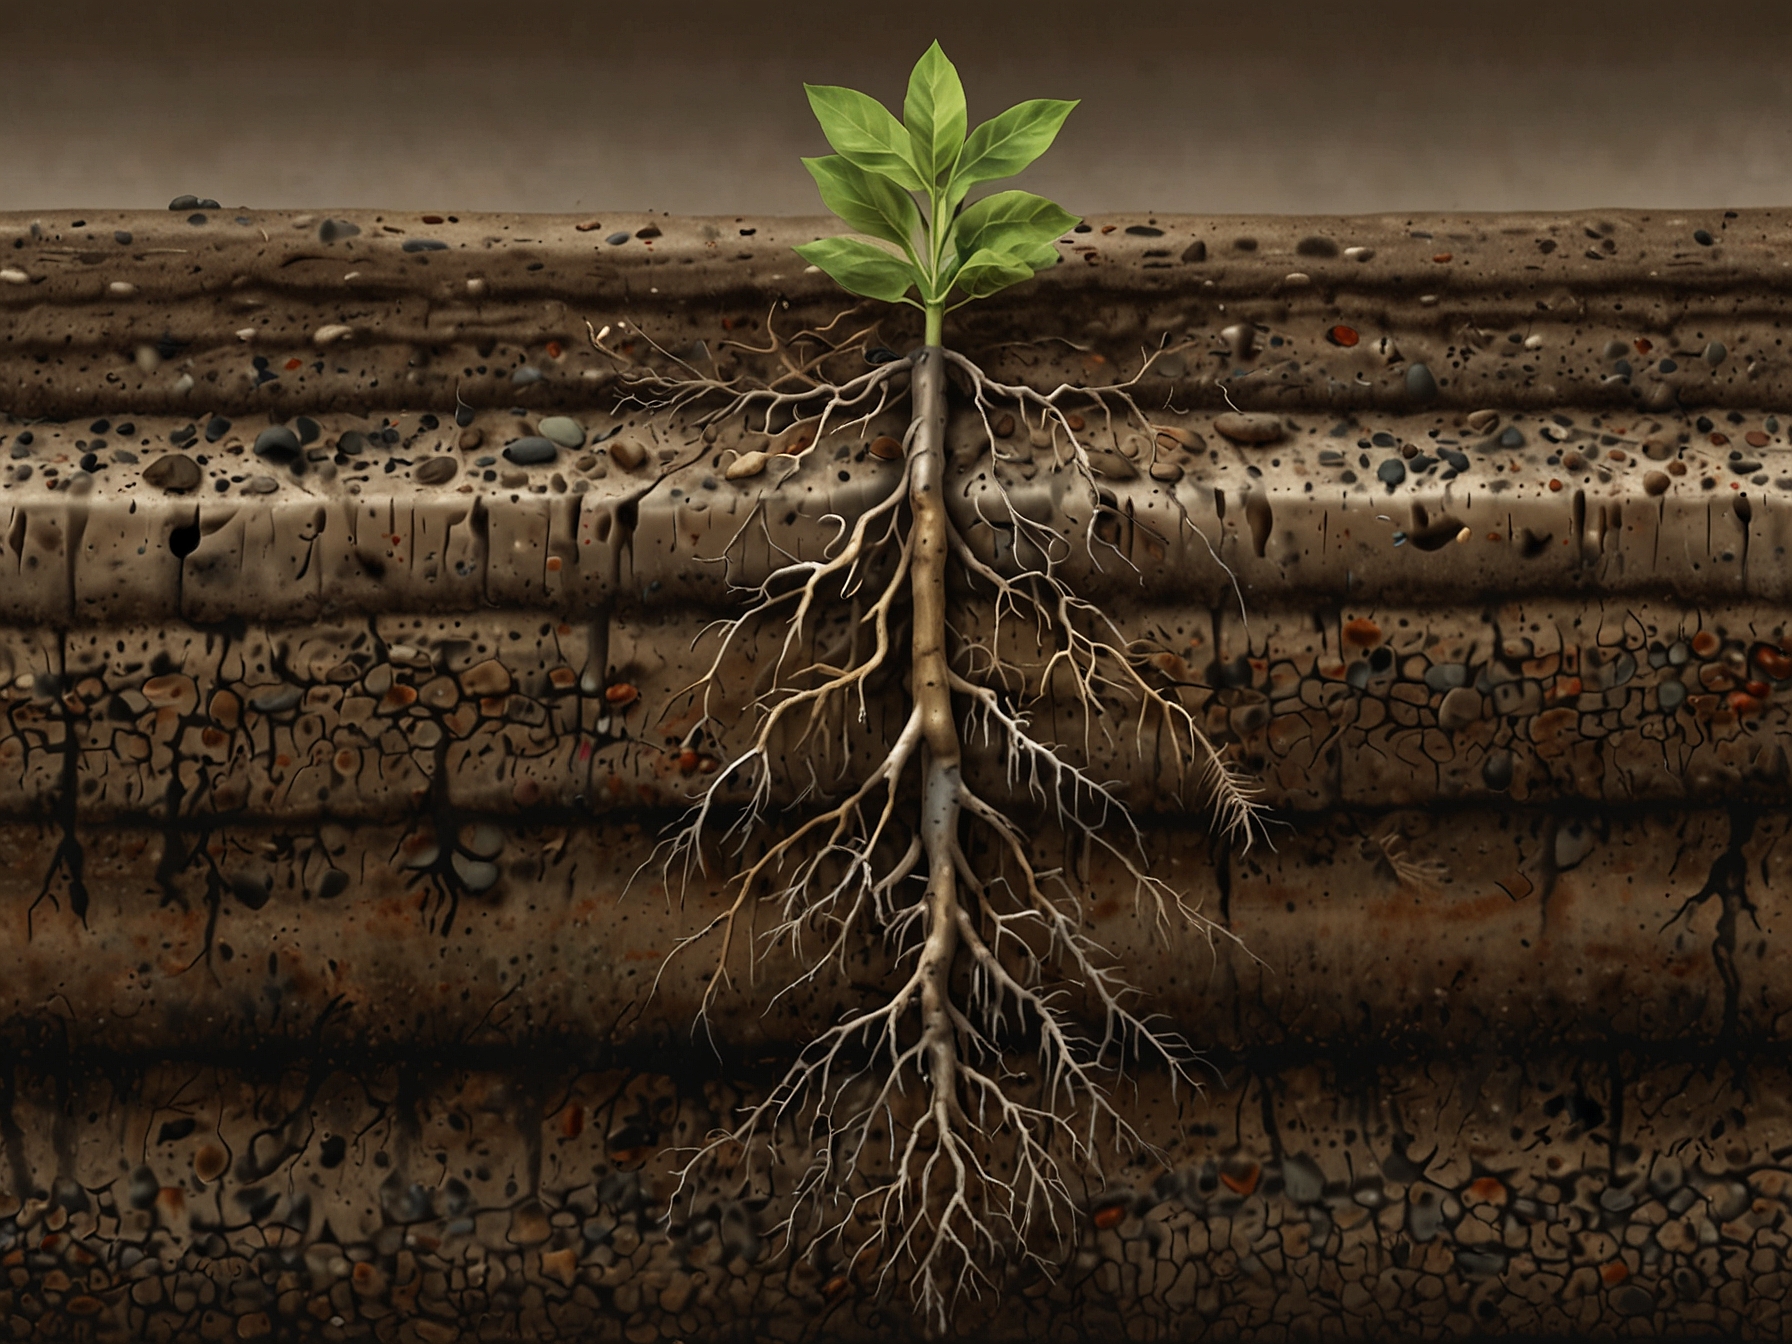 A close-up of plant roots extending deep into the soil on the Tibetan Plateau, depicting changes in belowground biomass distribution due to climate-driven nutrient availability and soil activity.